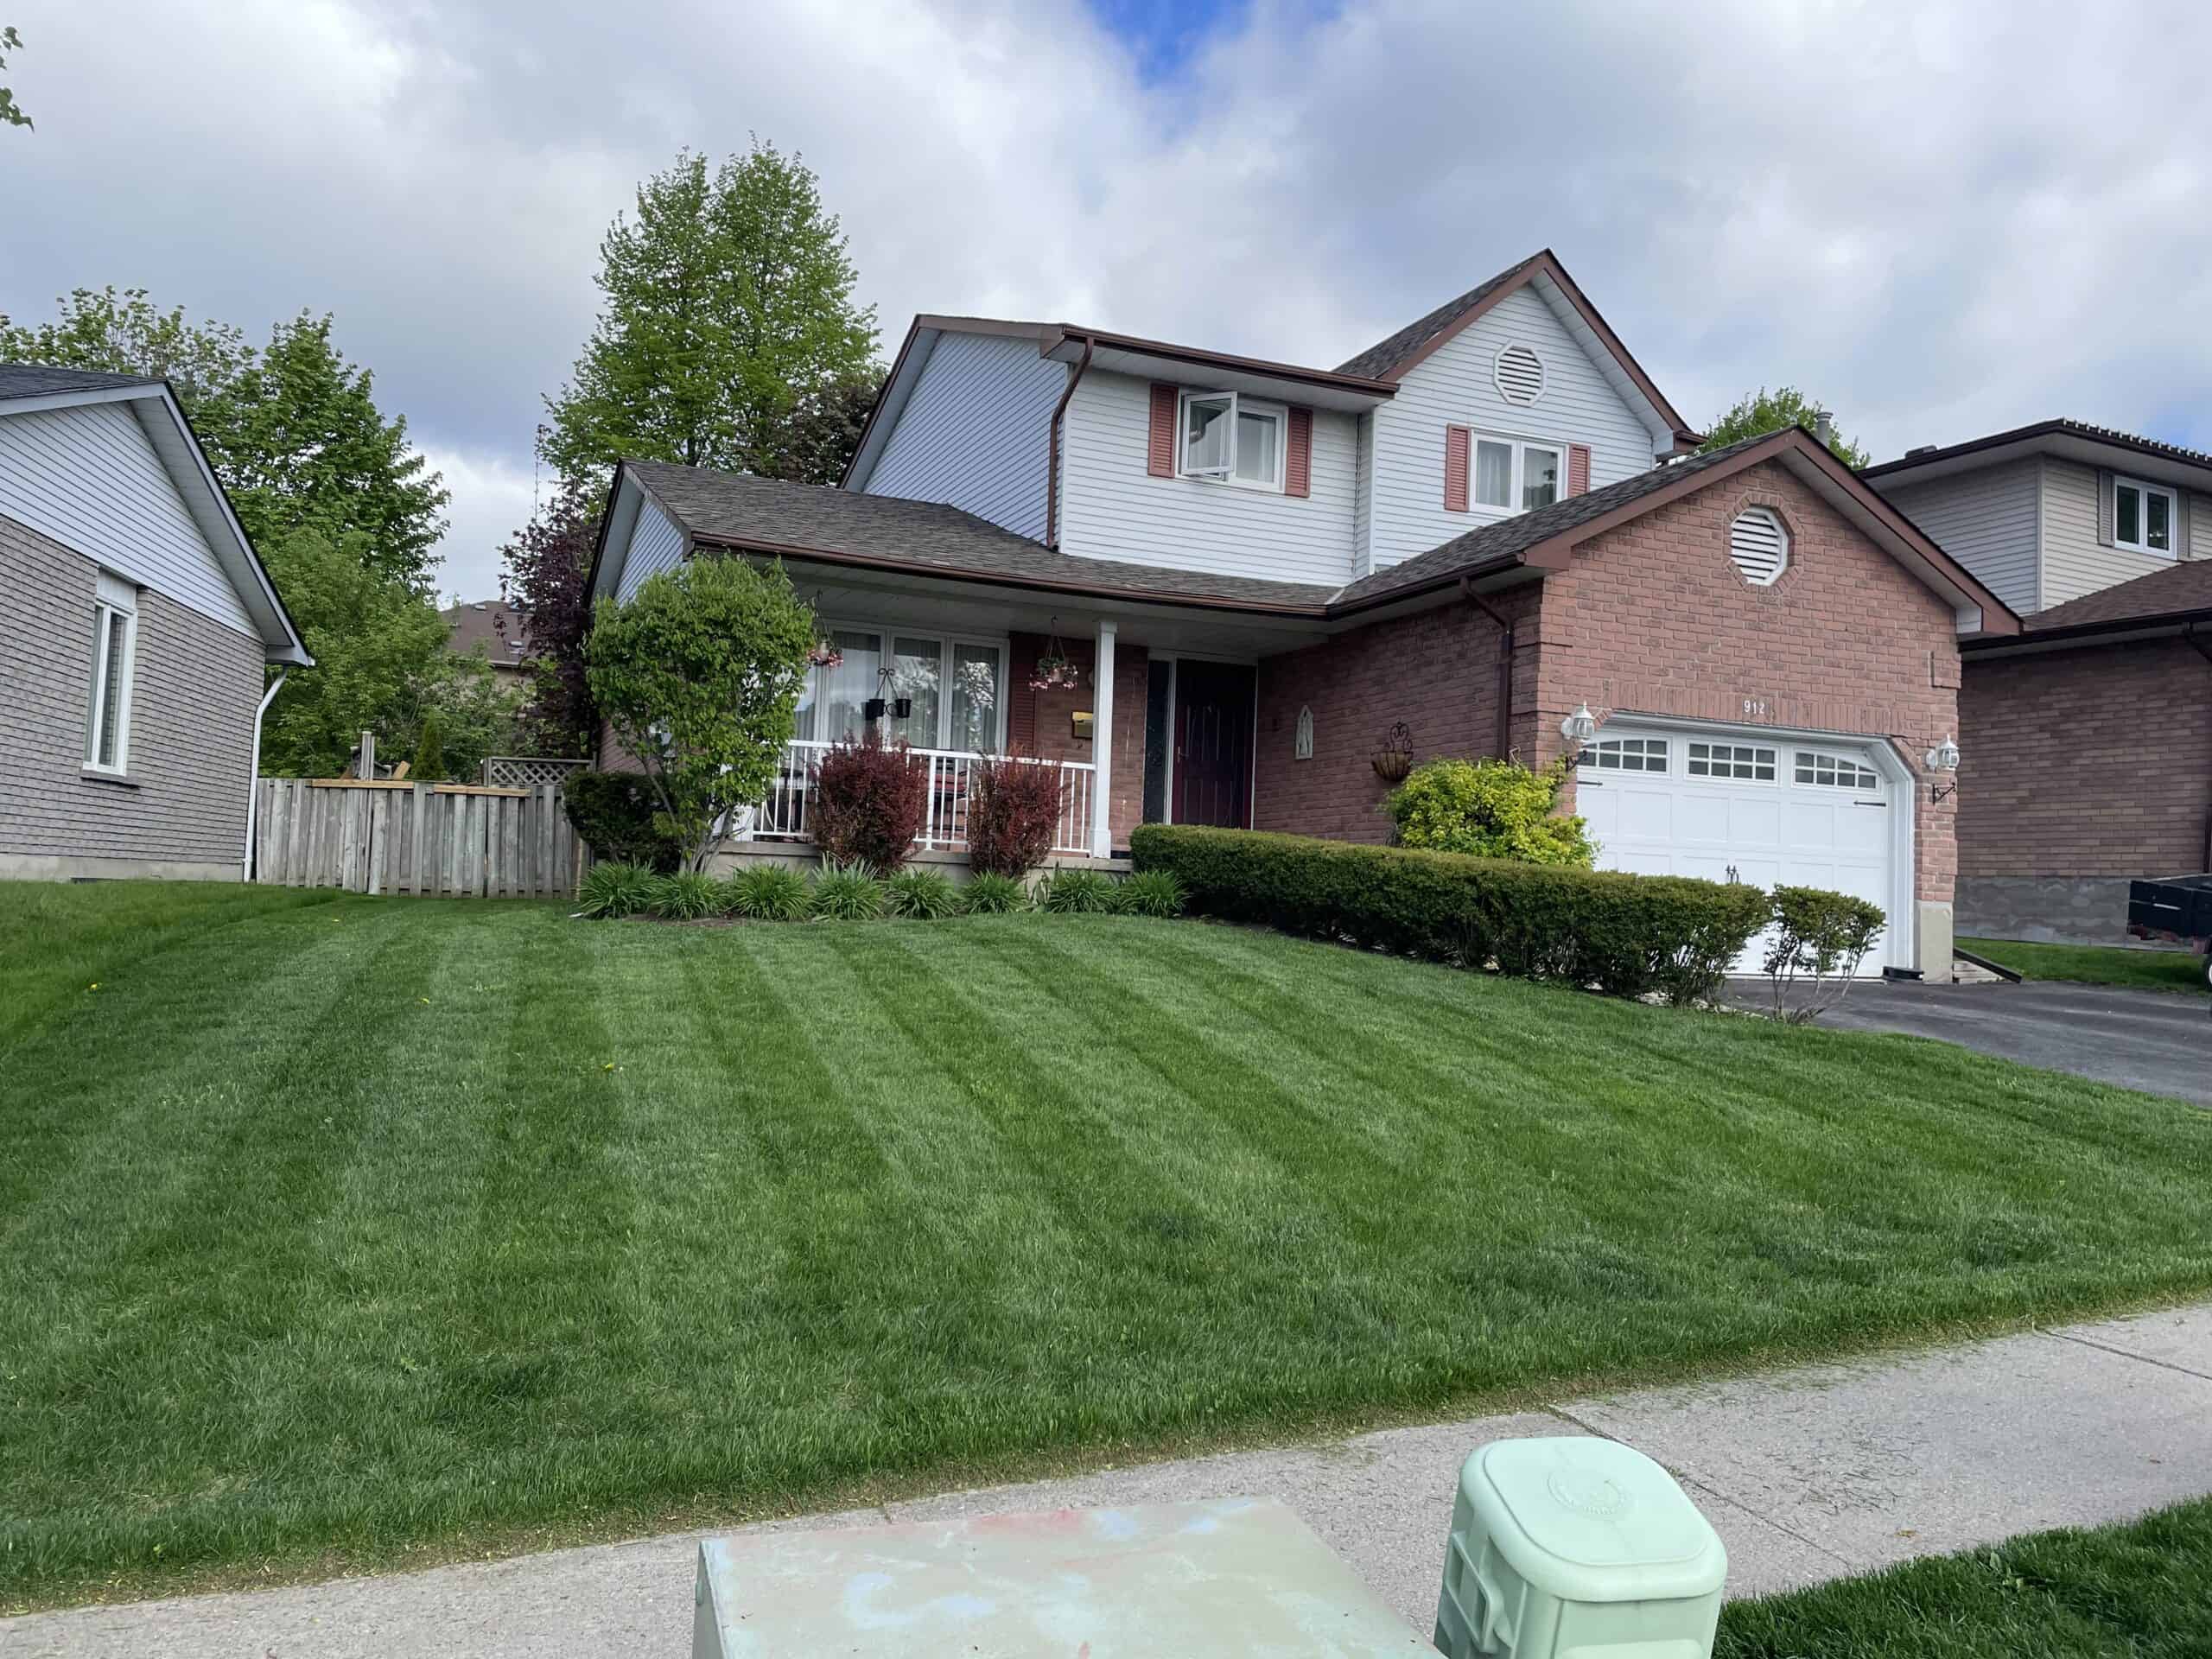  a freshly mowed front yard outside a two-story brick house with a covered porch and privacy fence